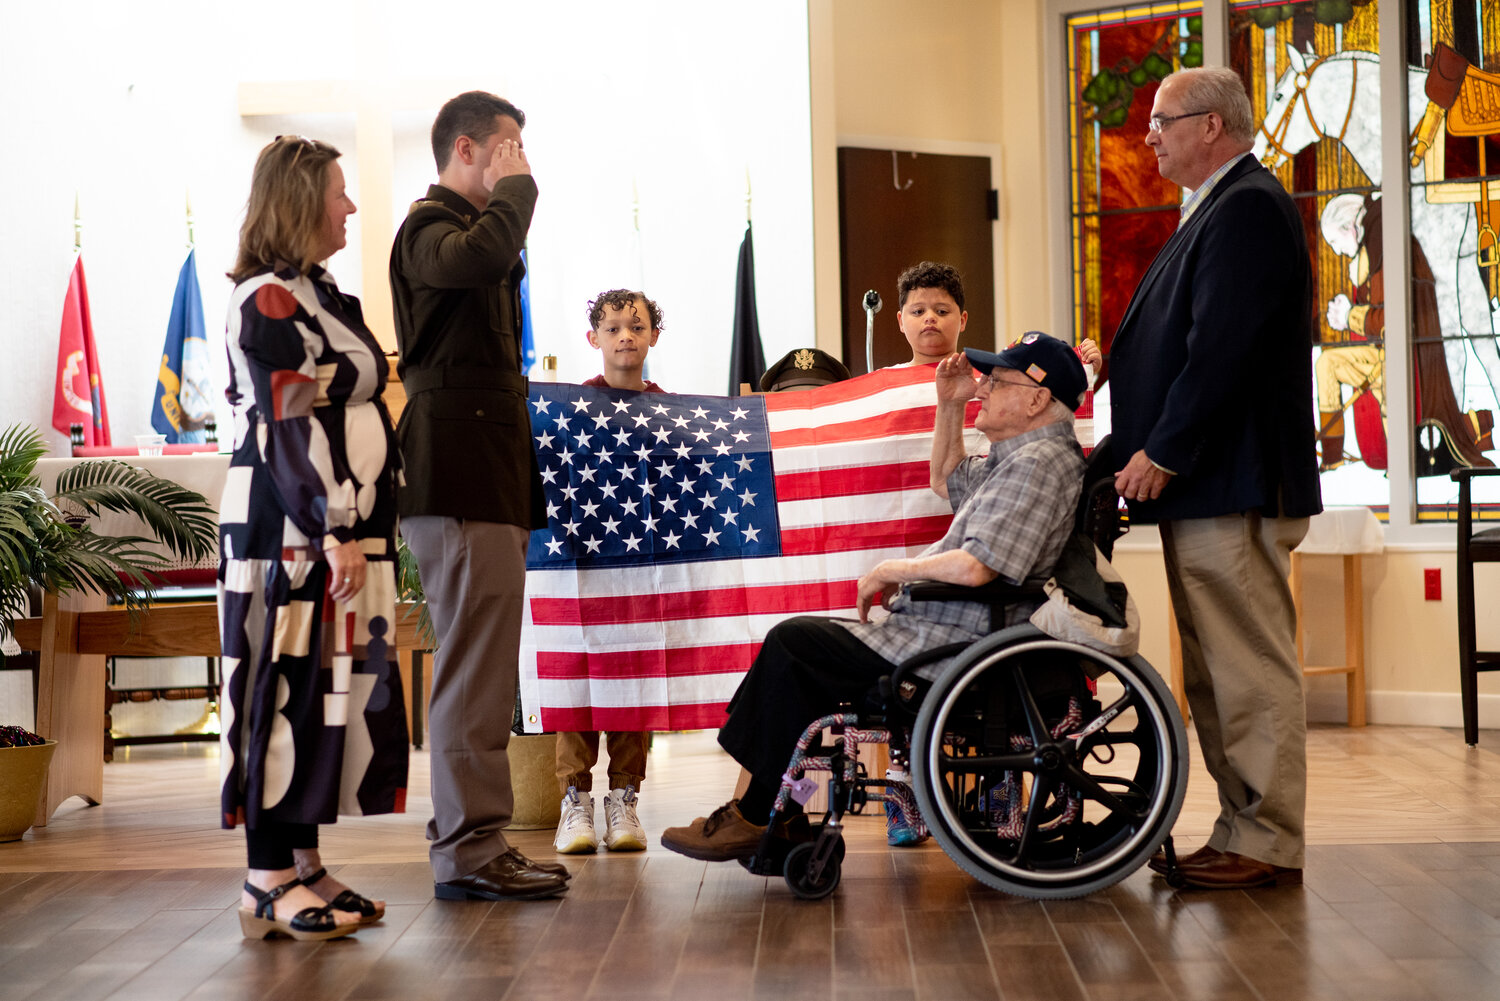 U.S. Army 2nd Lieutenant Chris Rego, standing left, salutes his grandfather, James C. Rego, a Korean War veteran and retired Senior Master Sergeant in the Air Force, at a Silver Dollar Salute ceremony at the Bristol Veterans Home on Sunday, May 7. Also pictured are Xavier and Elijah Yarbough (holding the flag), and Chris’s parents, Linda and Mike.